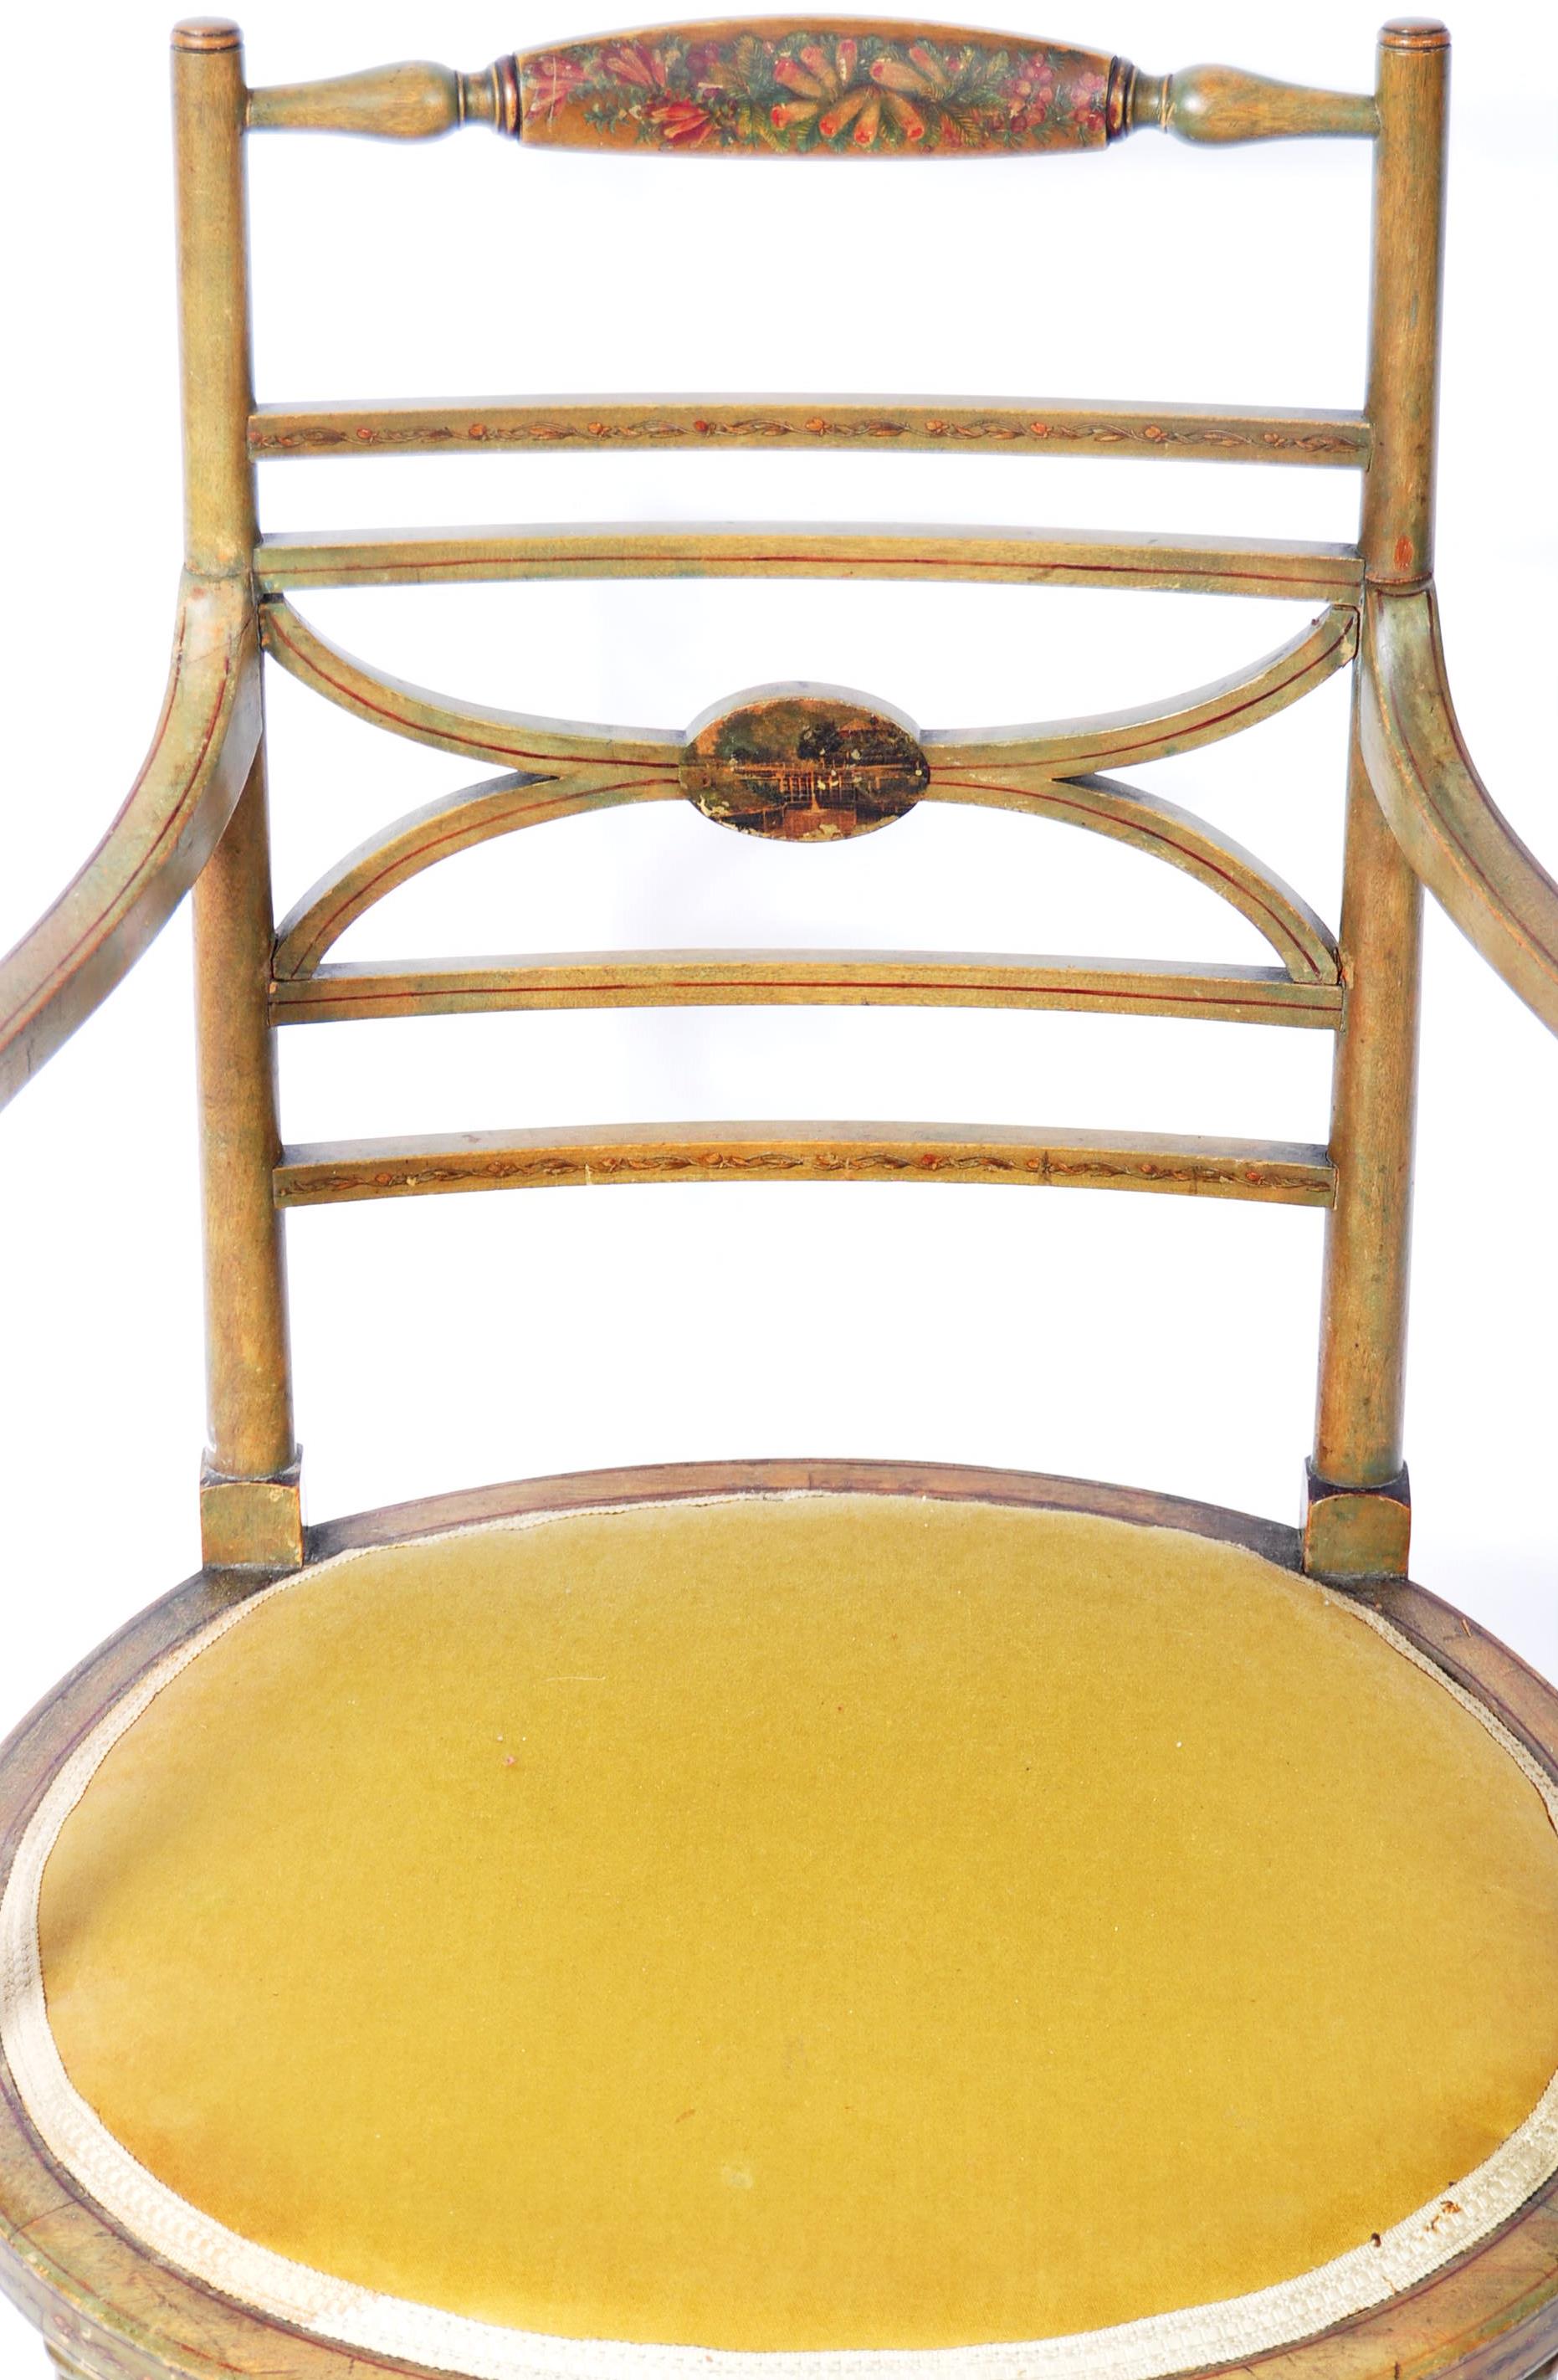 EARLY 19TH CENTURY GEORGIAN REGENCY PAINTED ARM CHAIR - Image 4 of 8